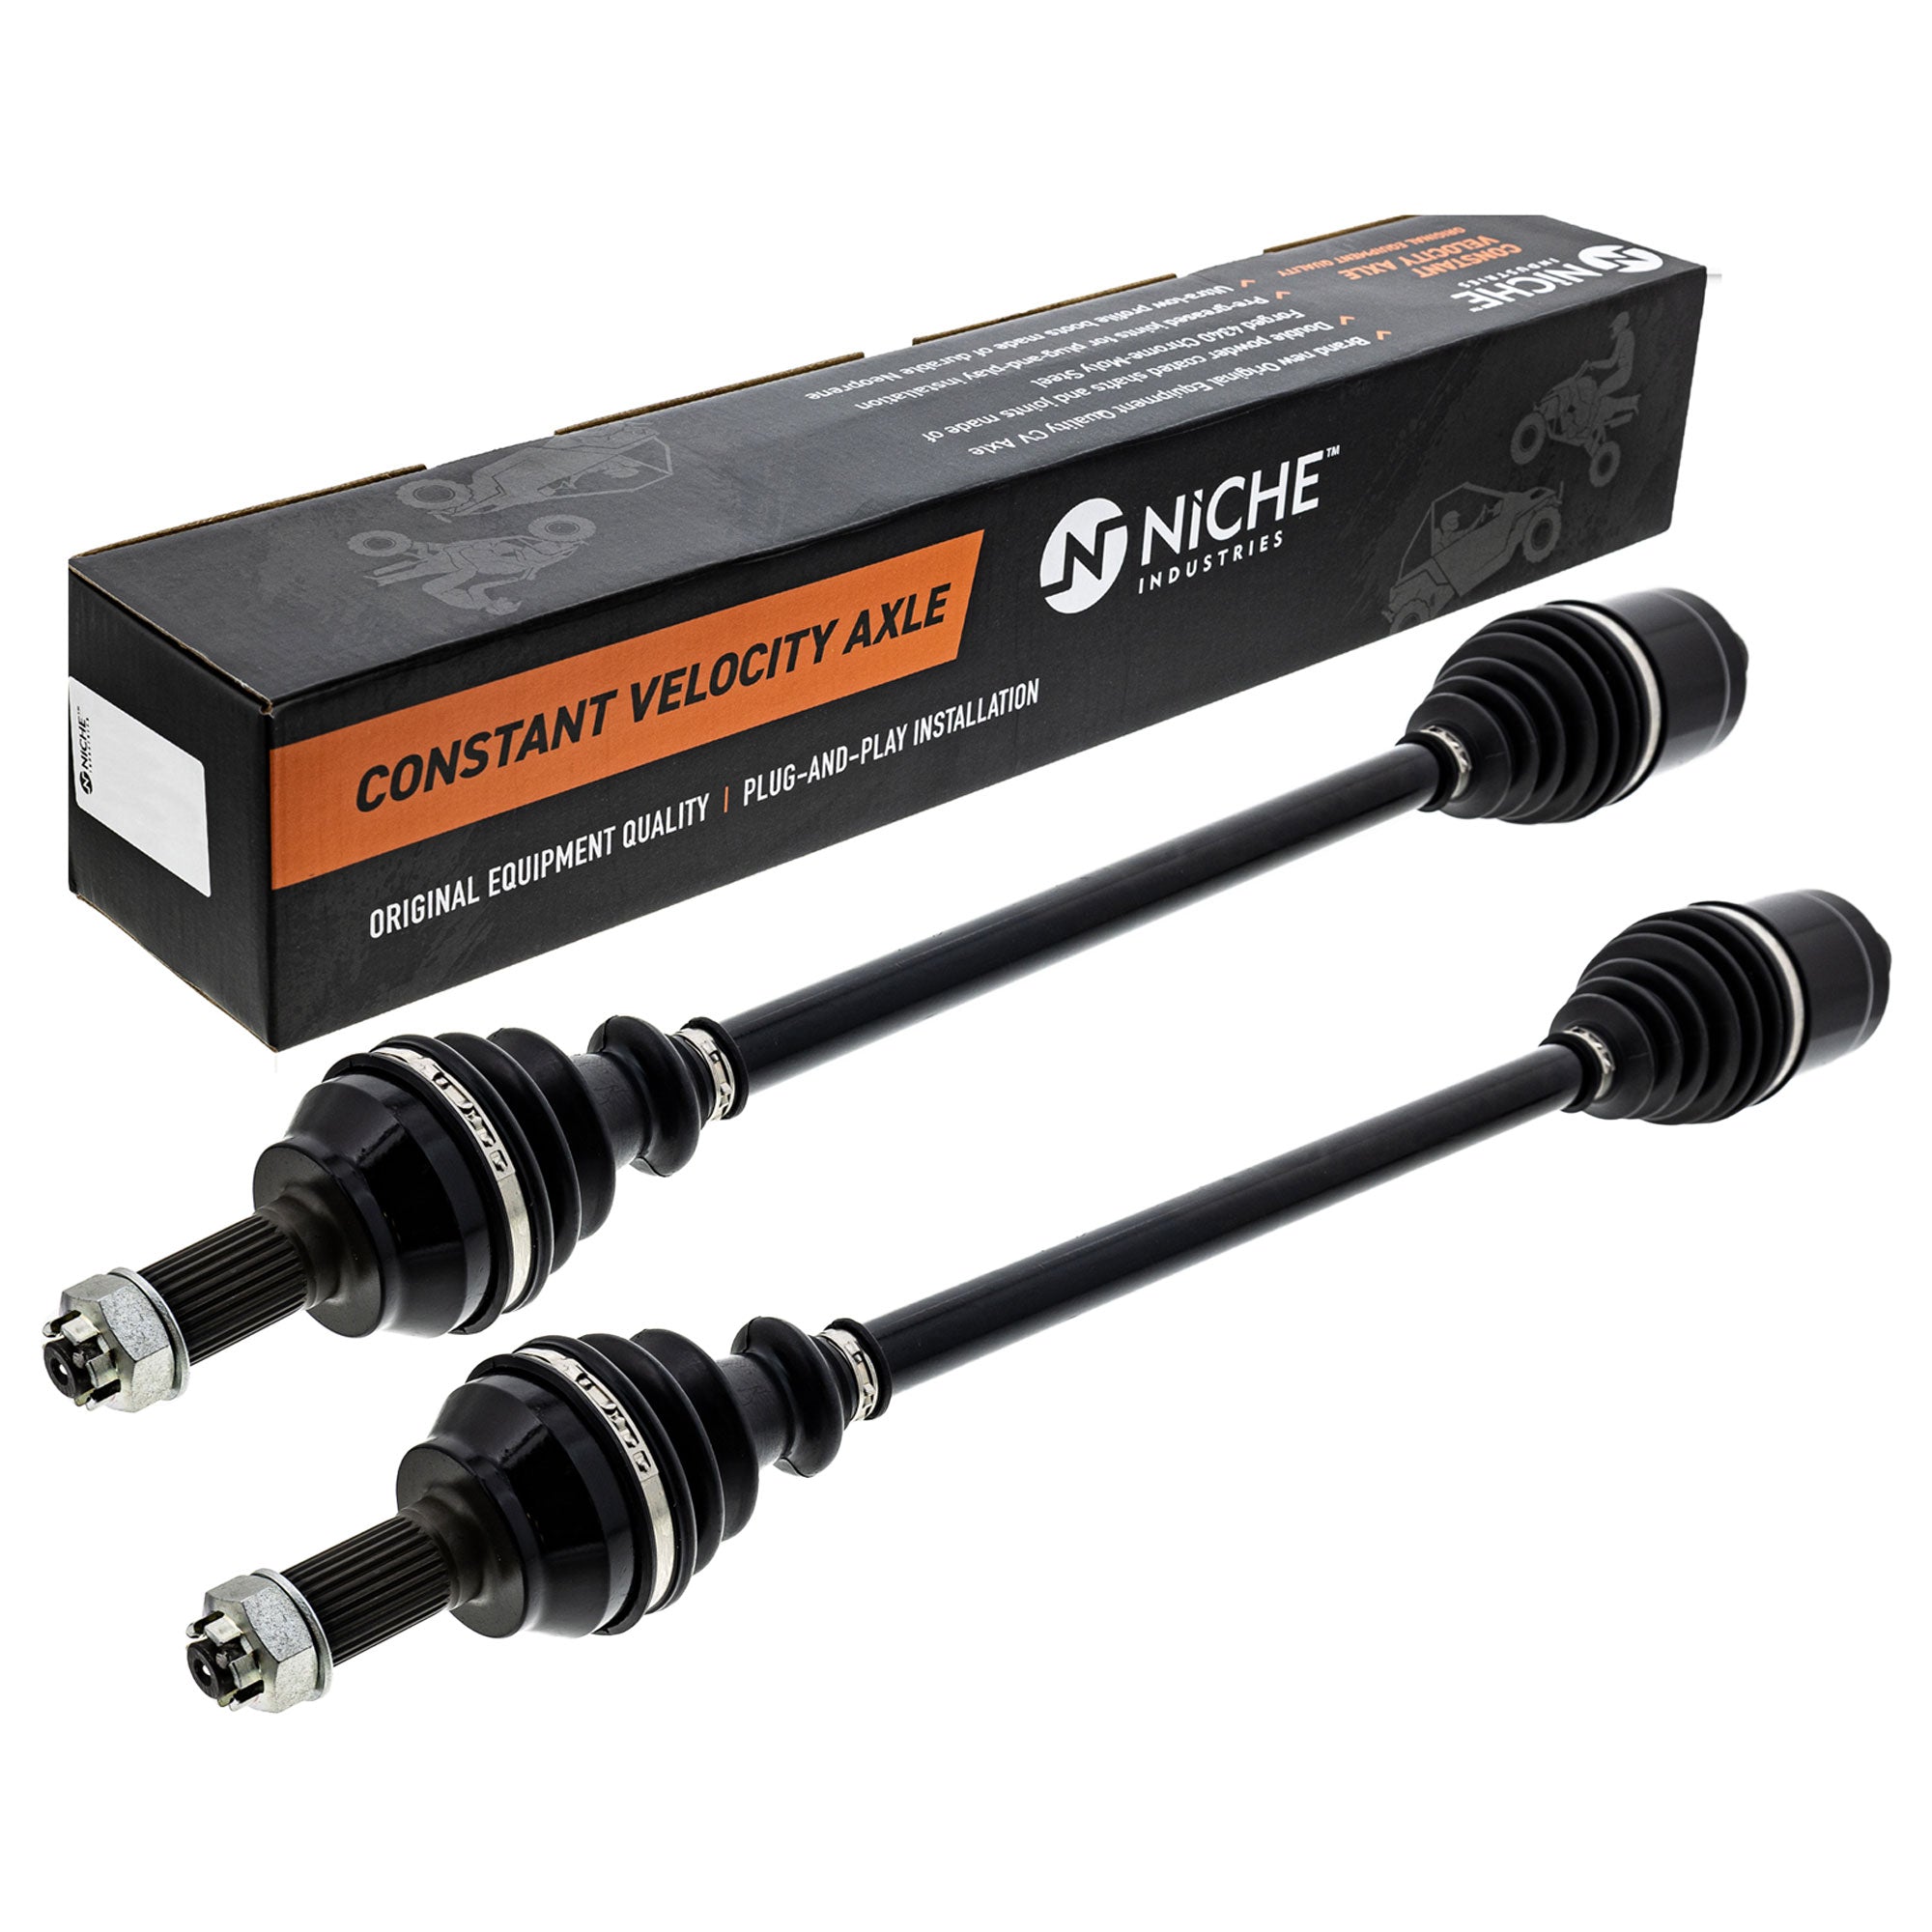 NICHE 519-KCA2387X Axle Parts 2-Pack for